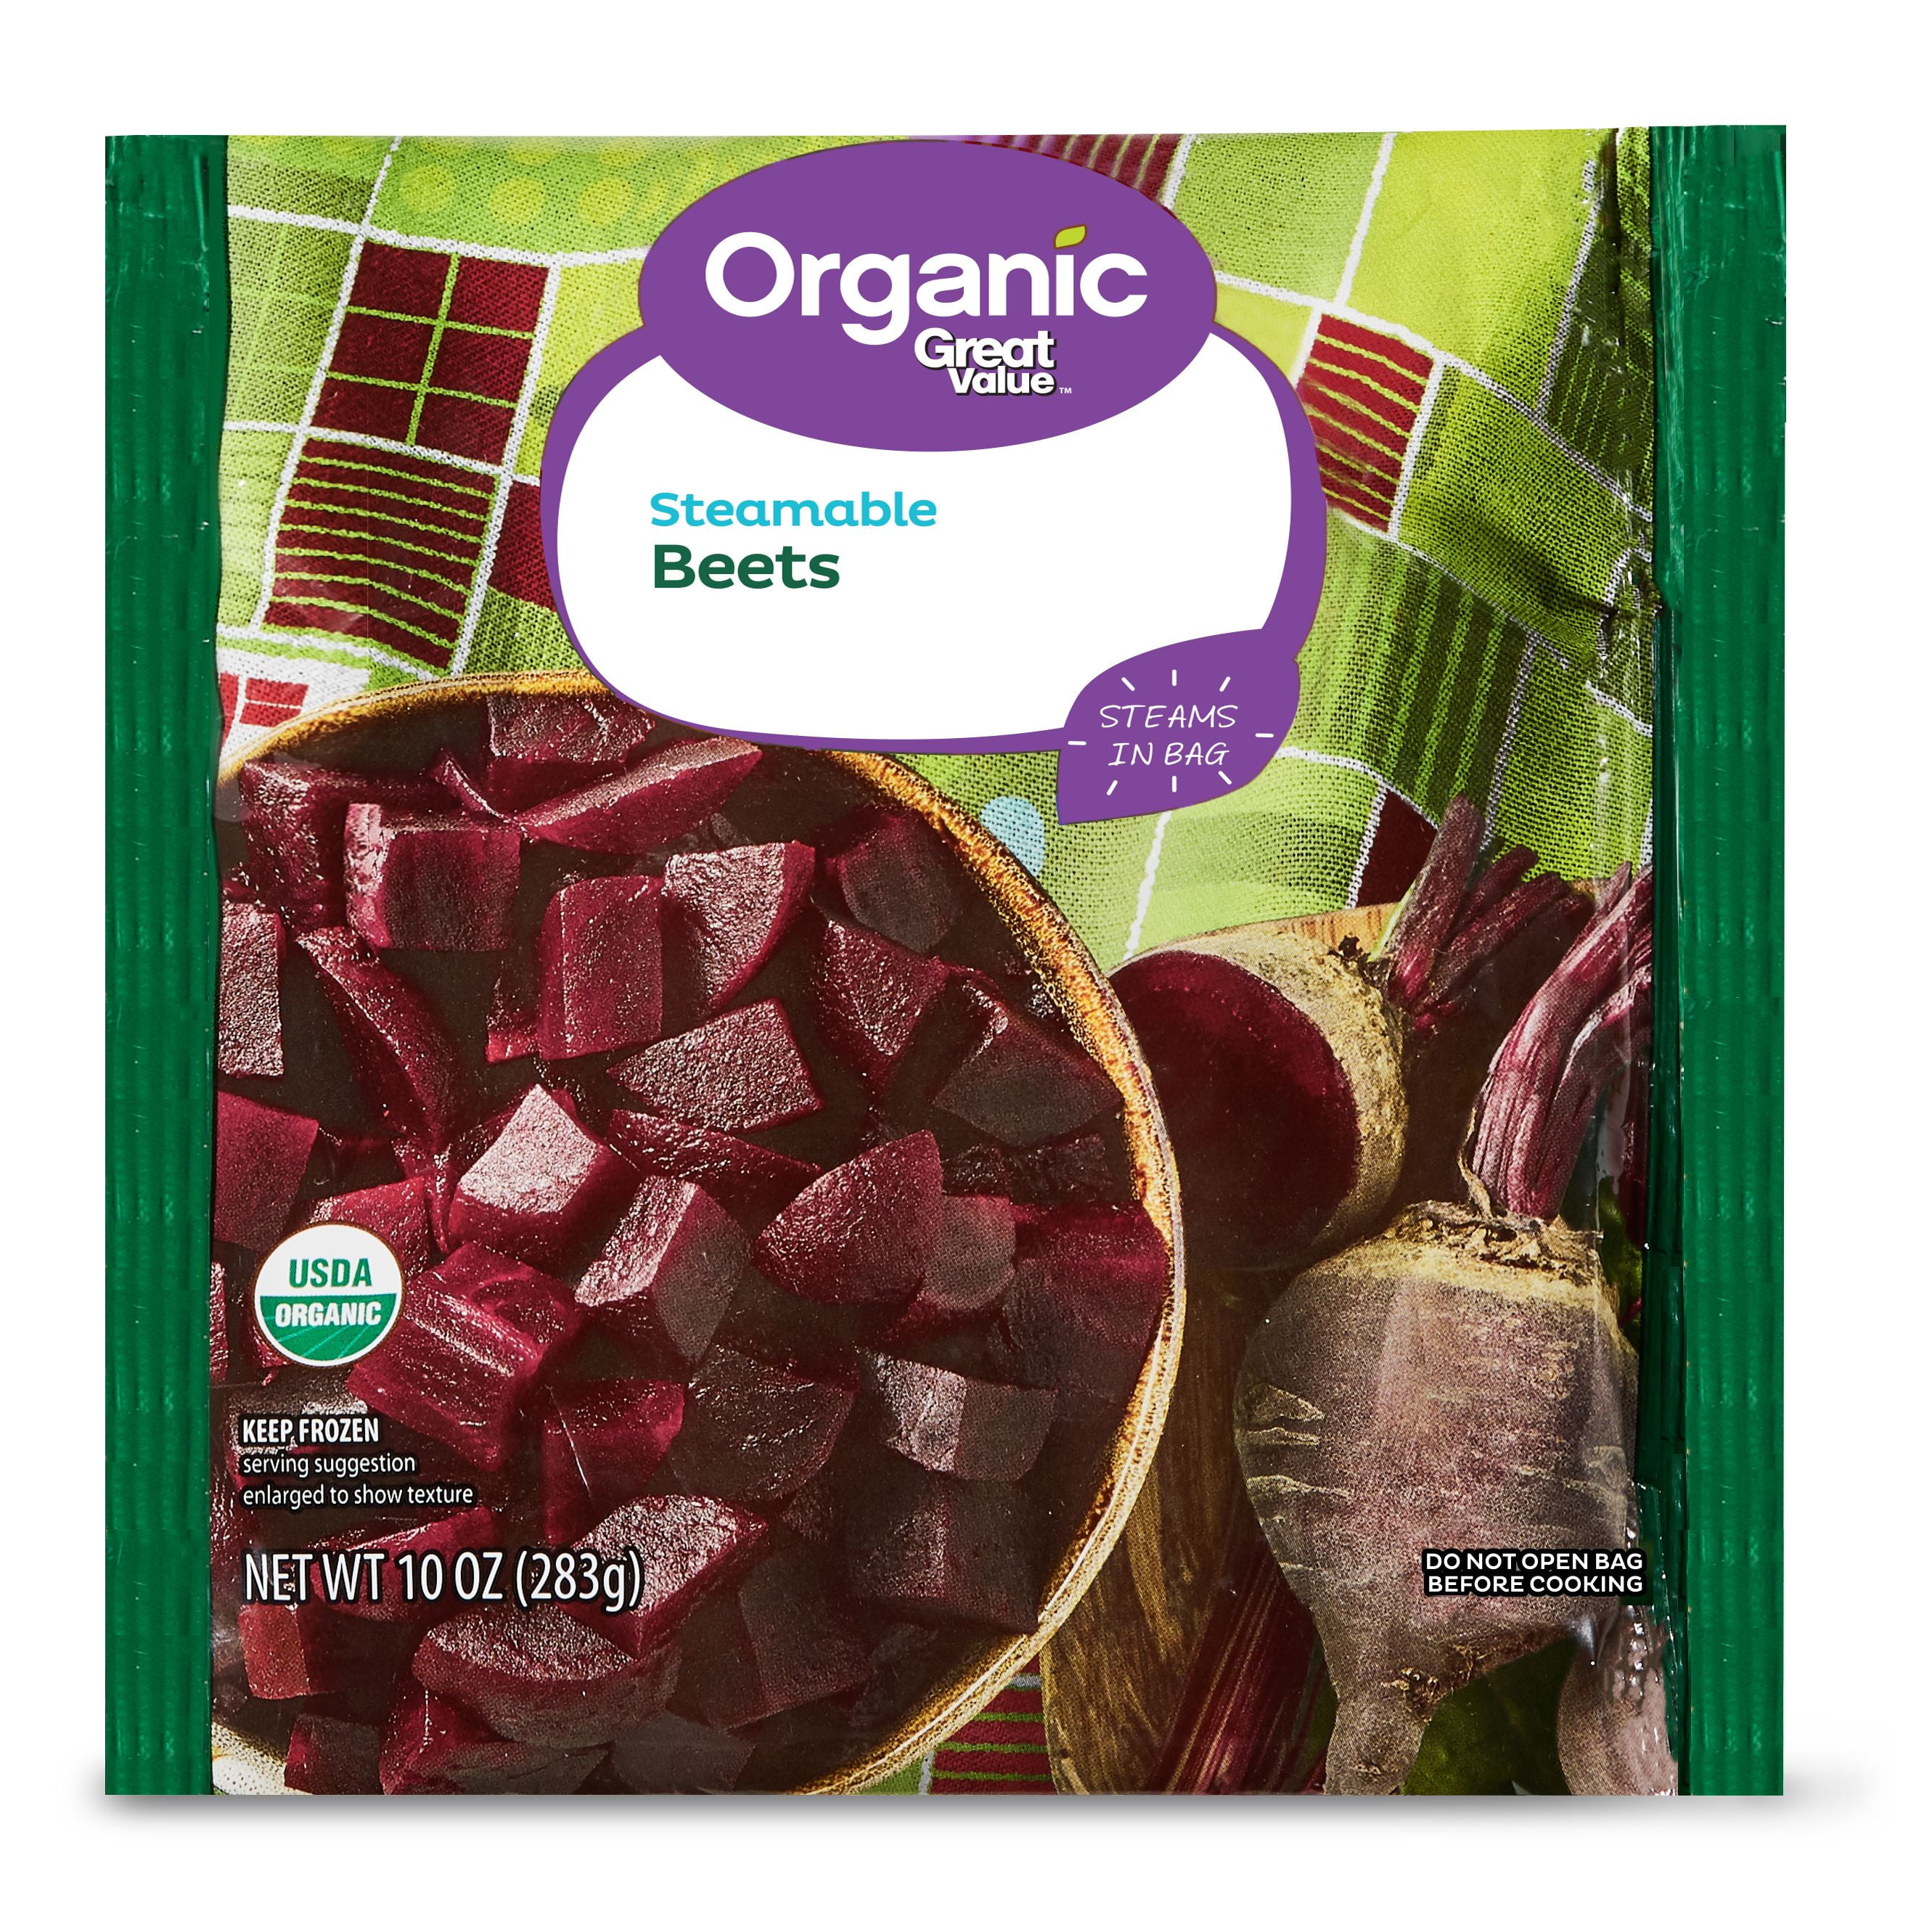 are frozen beets good for you